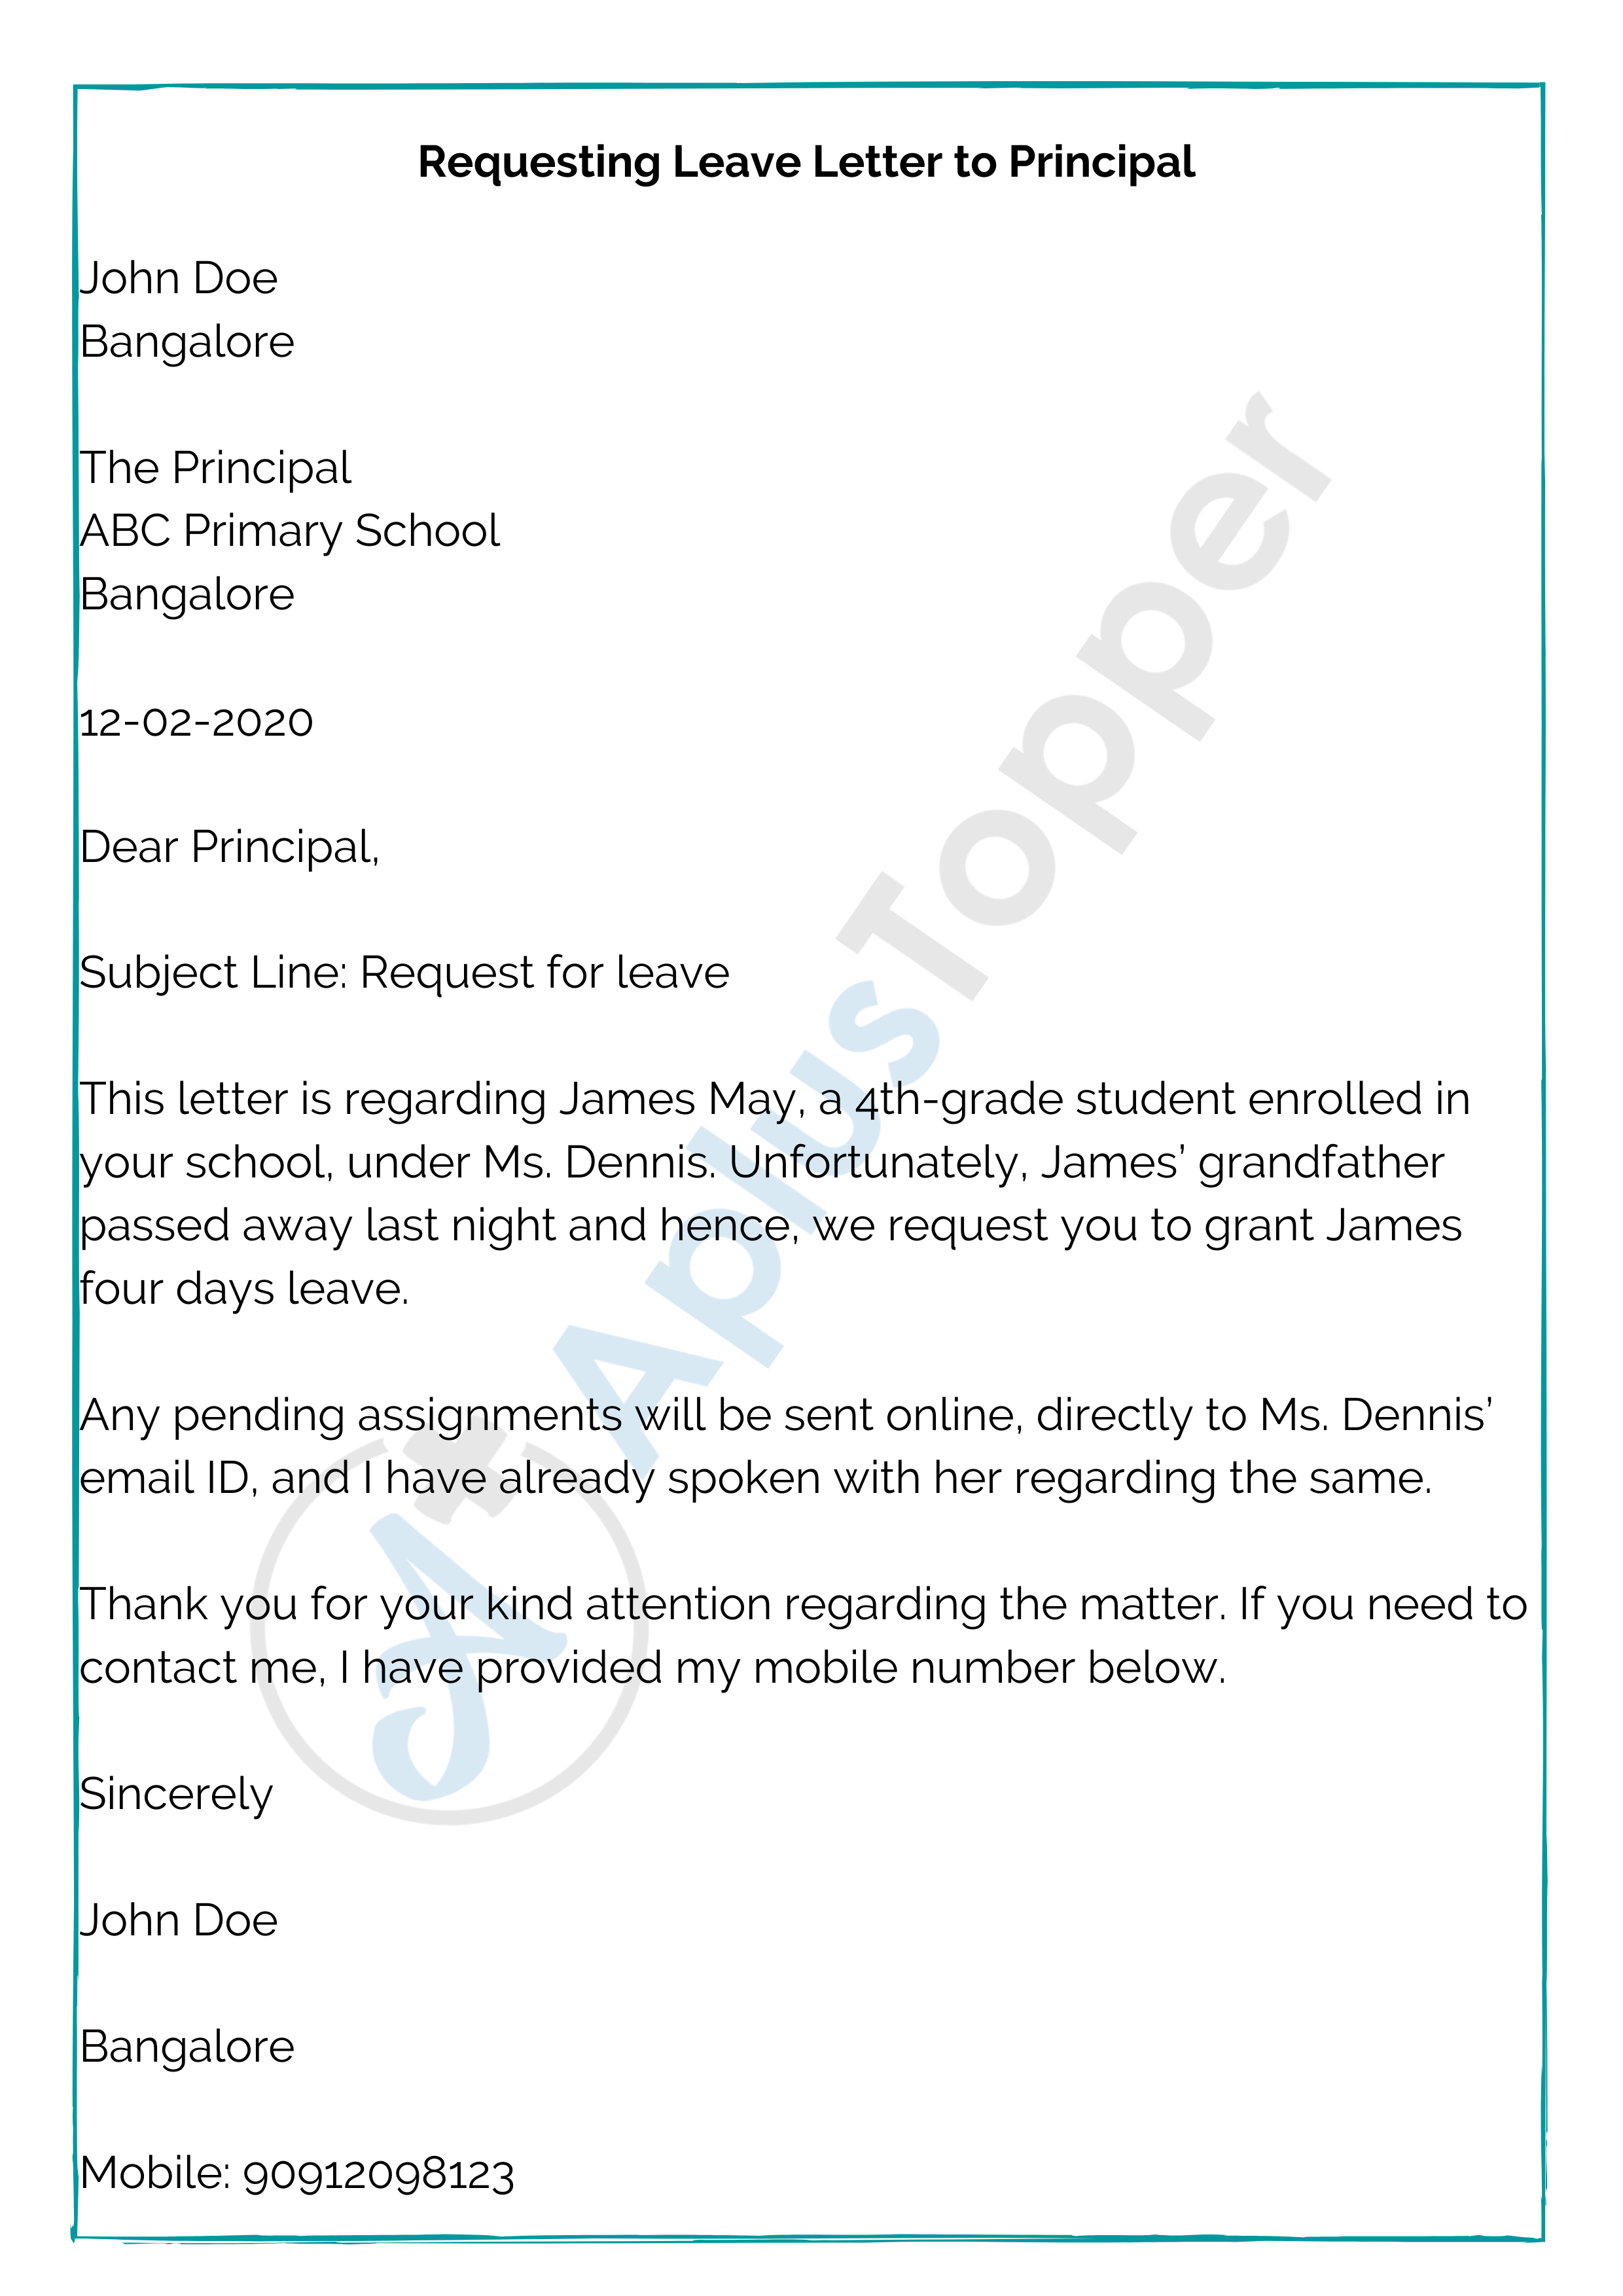 Letter To Principal  Format, Sample and How To Write an Letter To